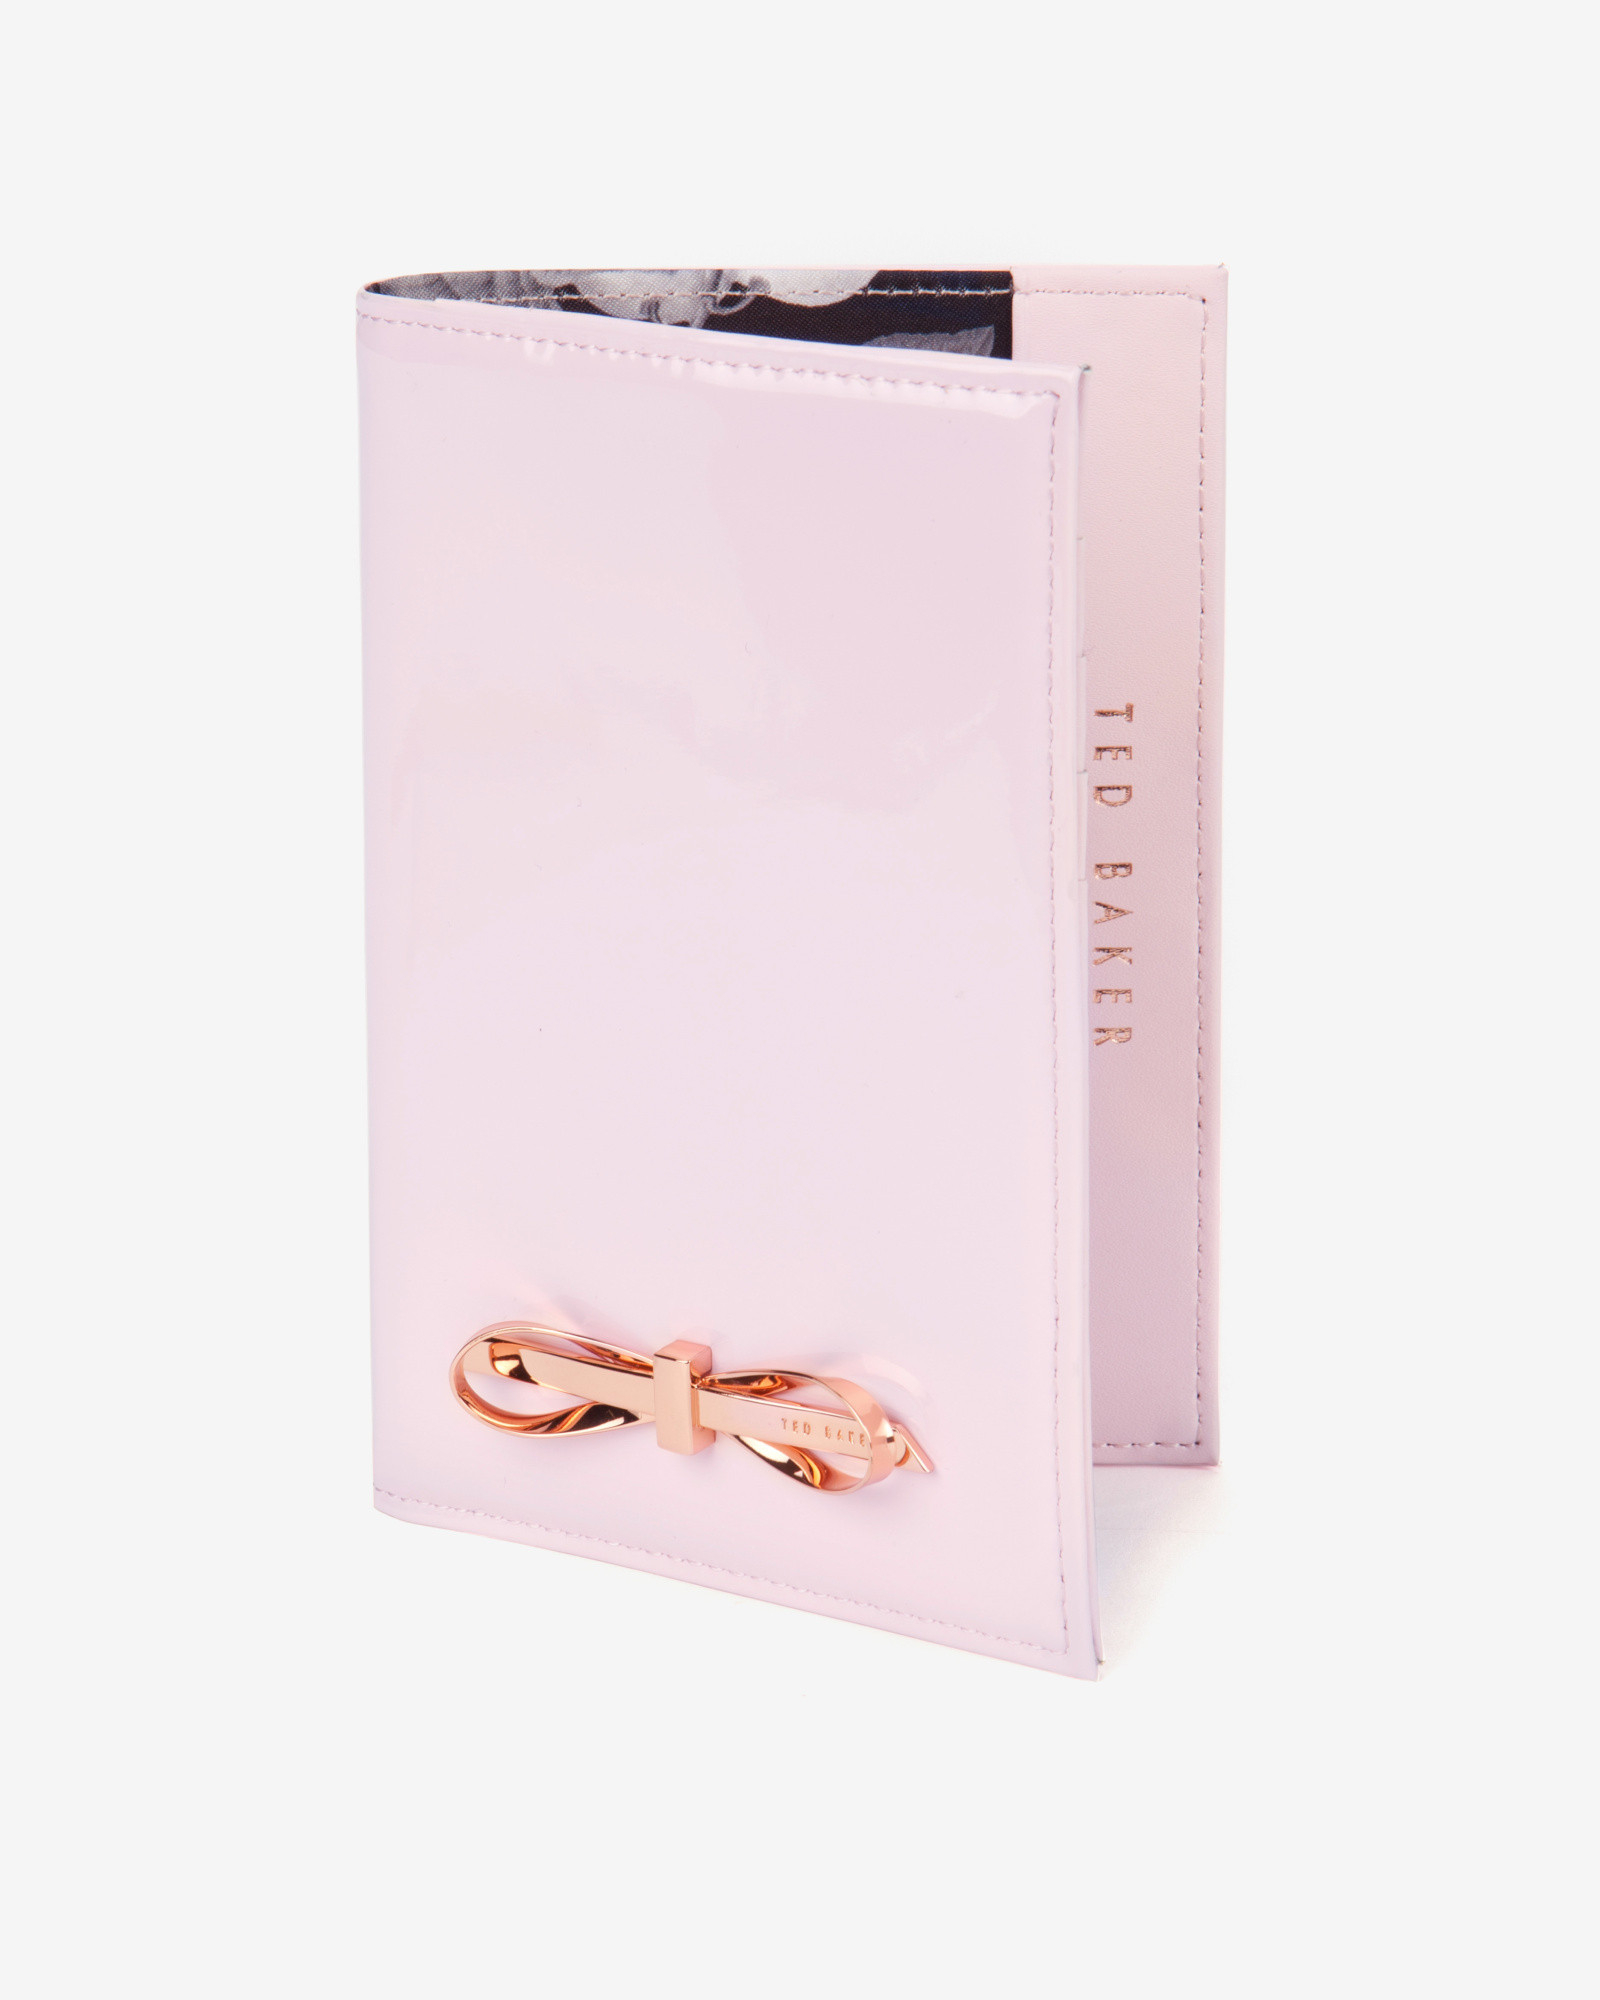 Ted Baker Patent Passport Holder in Baby Pink (Pink) for Men - Lyst